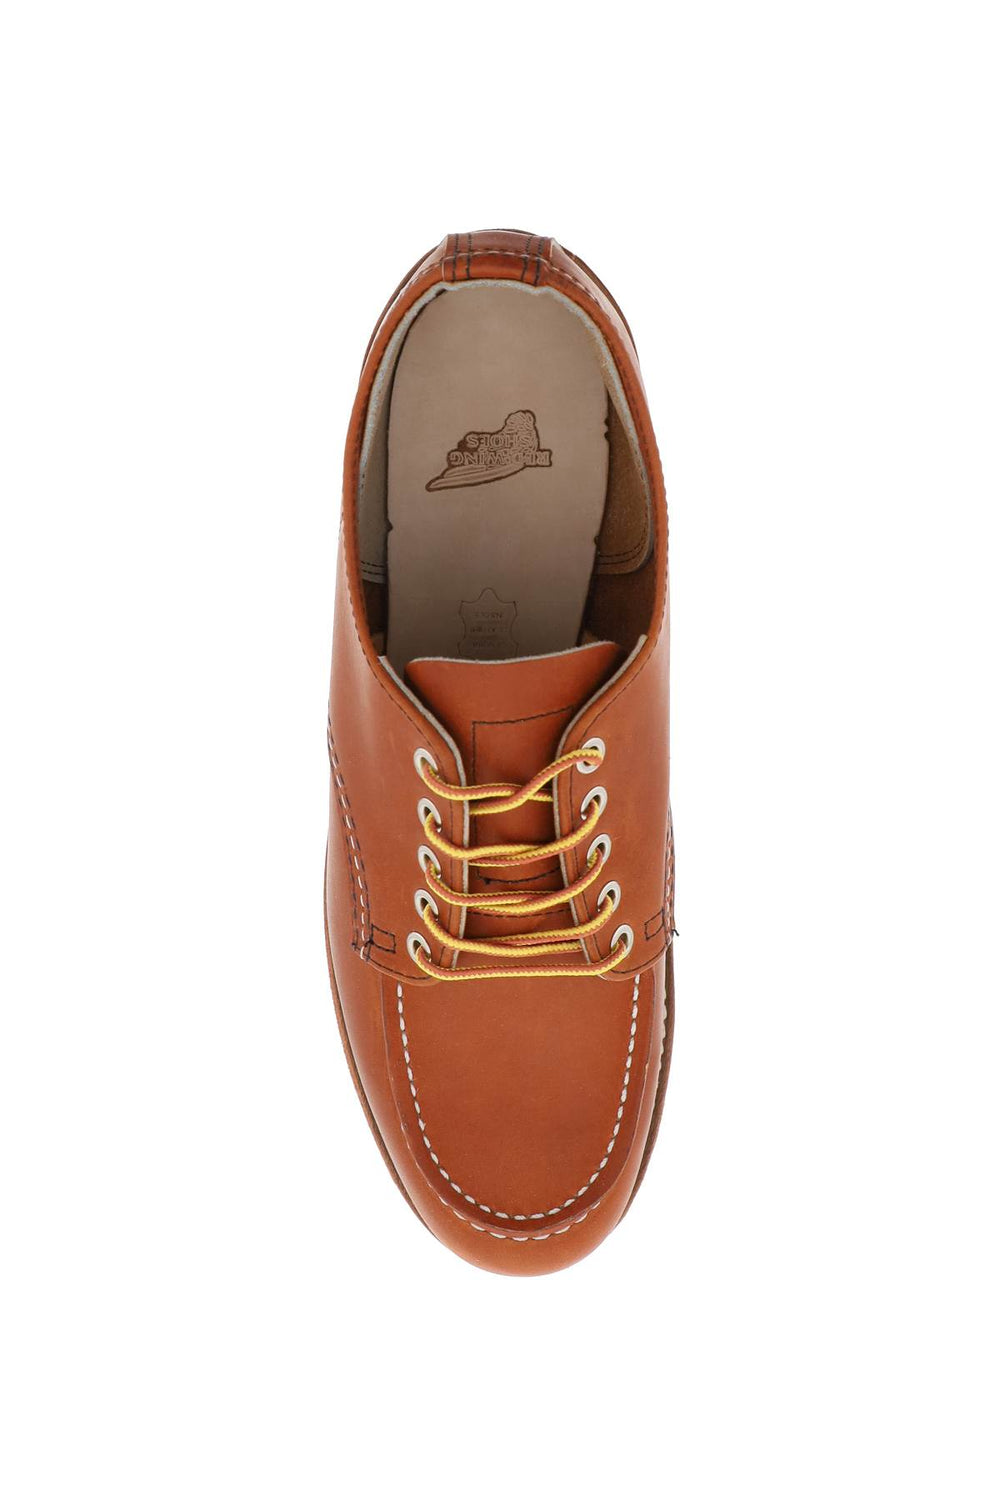 Red wing shoes laced moc toe oxford-1